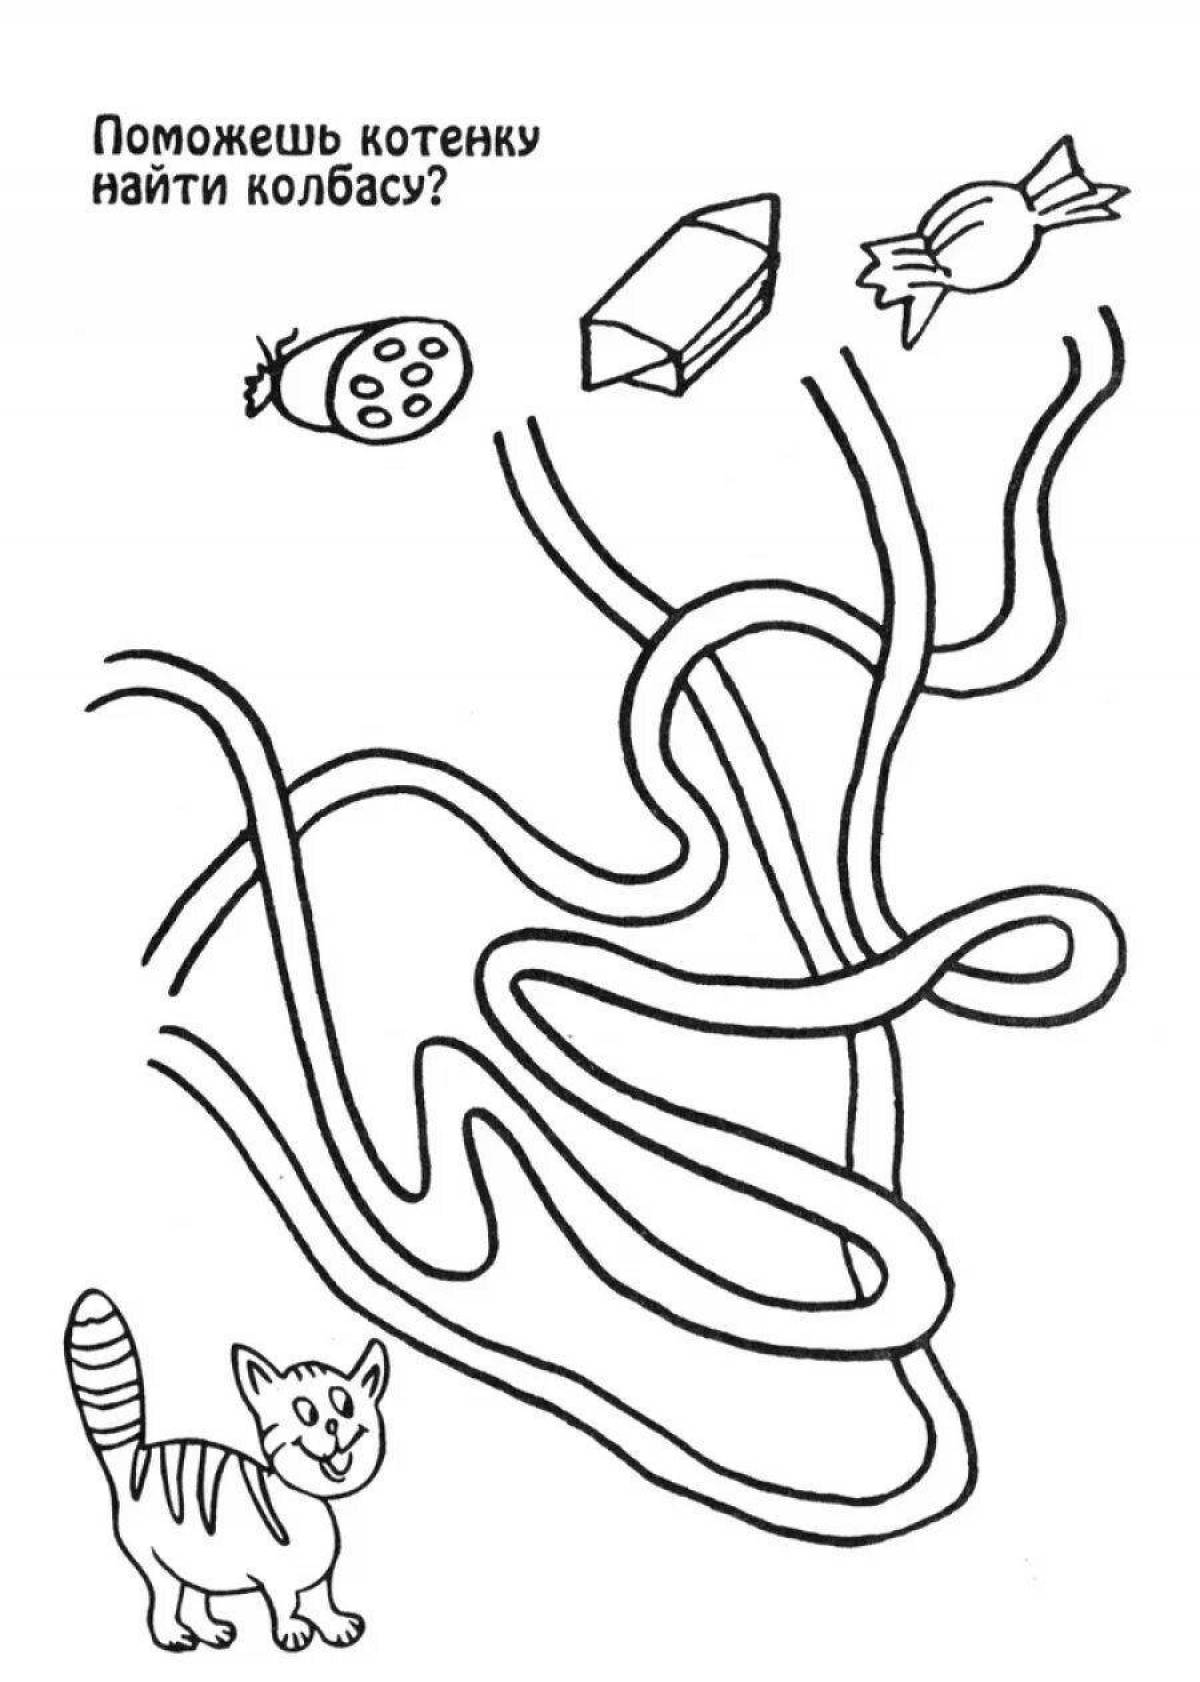 Fun coloring maze for 3-4 year olds